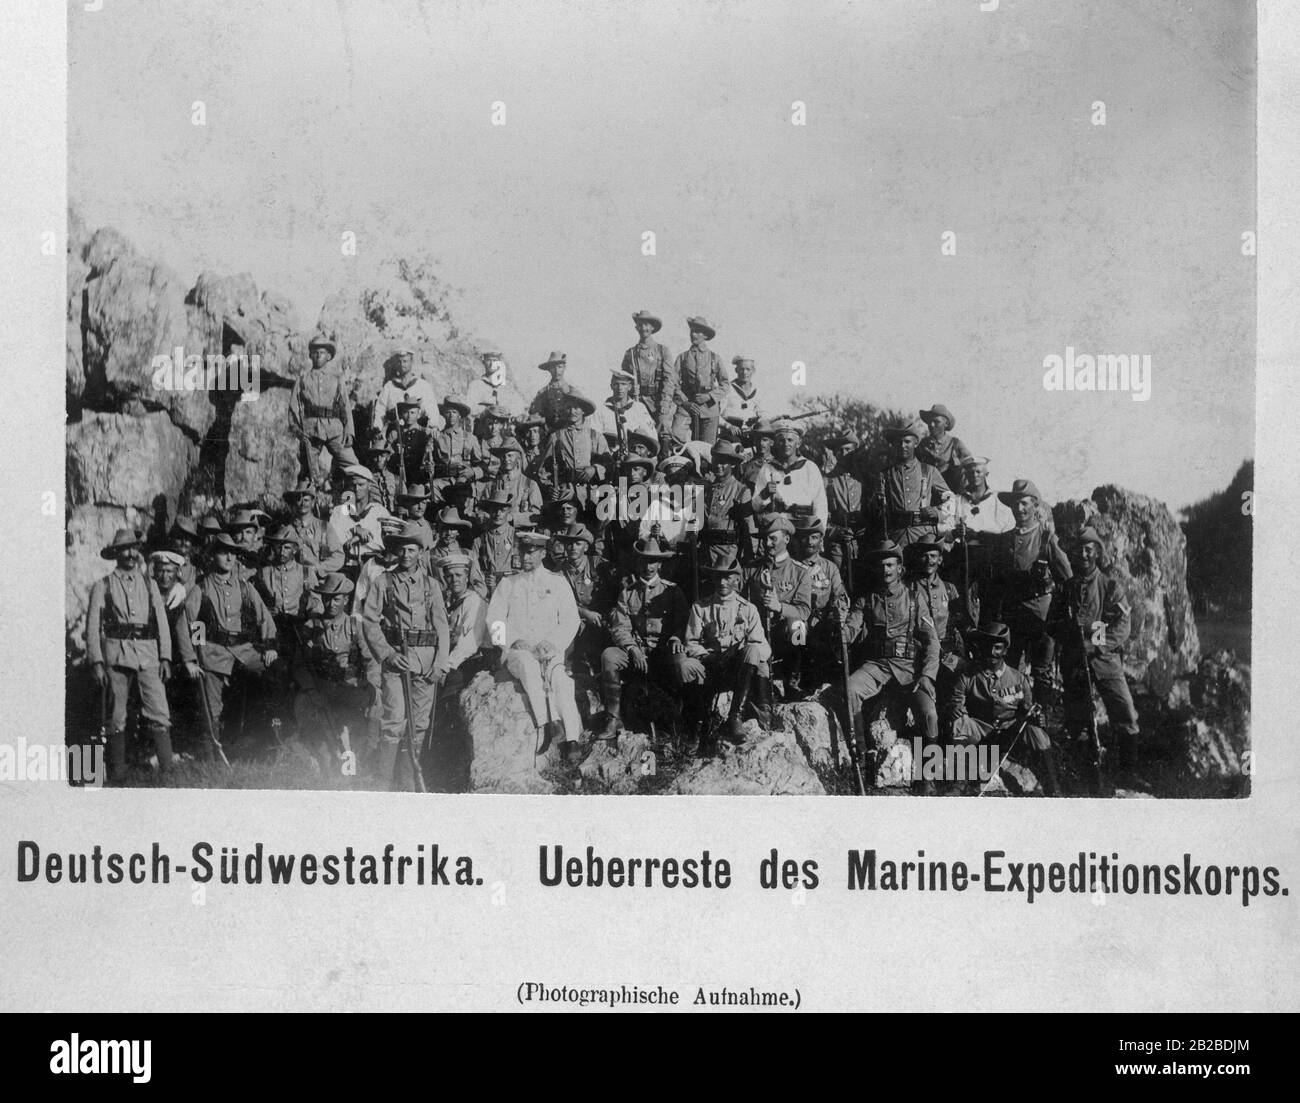 The surviving soldiers of the Marine Expeditionary Corps in German South West Africa. Here, German soldiers and native Herero had fierce fights between 1904 and 1906. Stock Photo